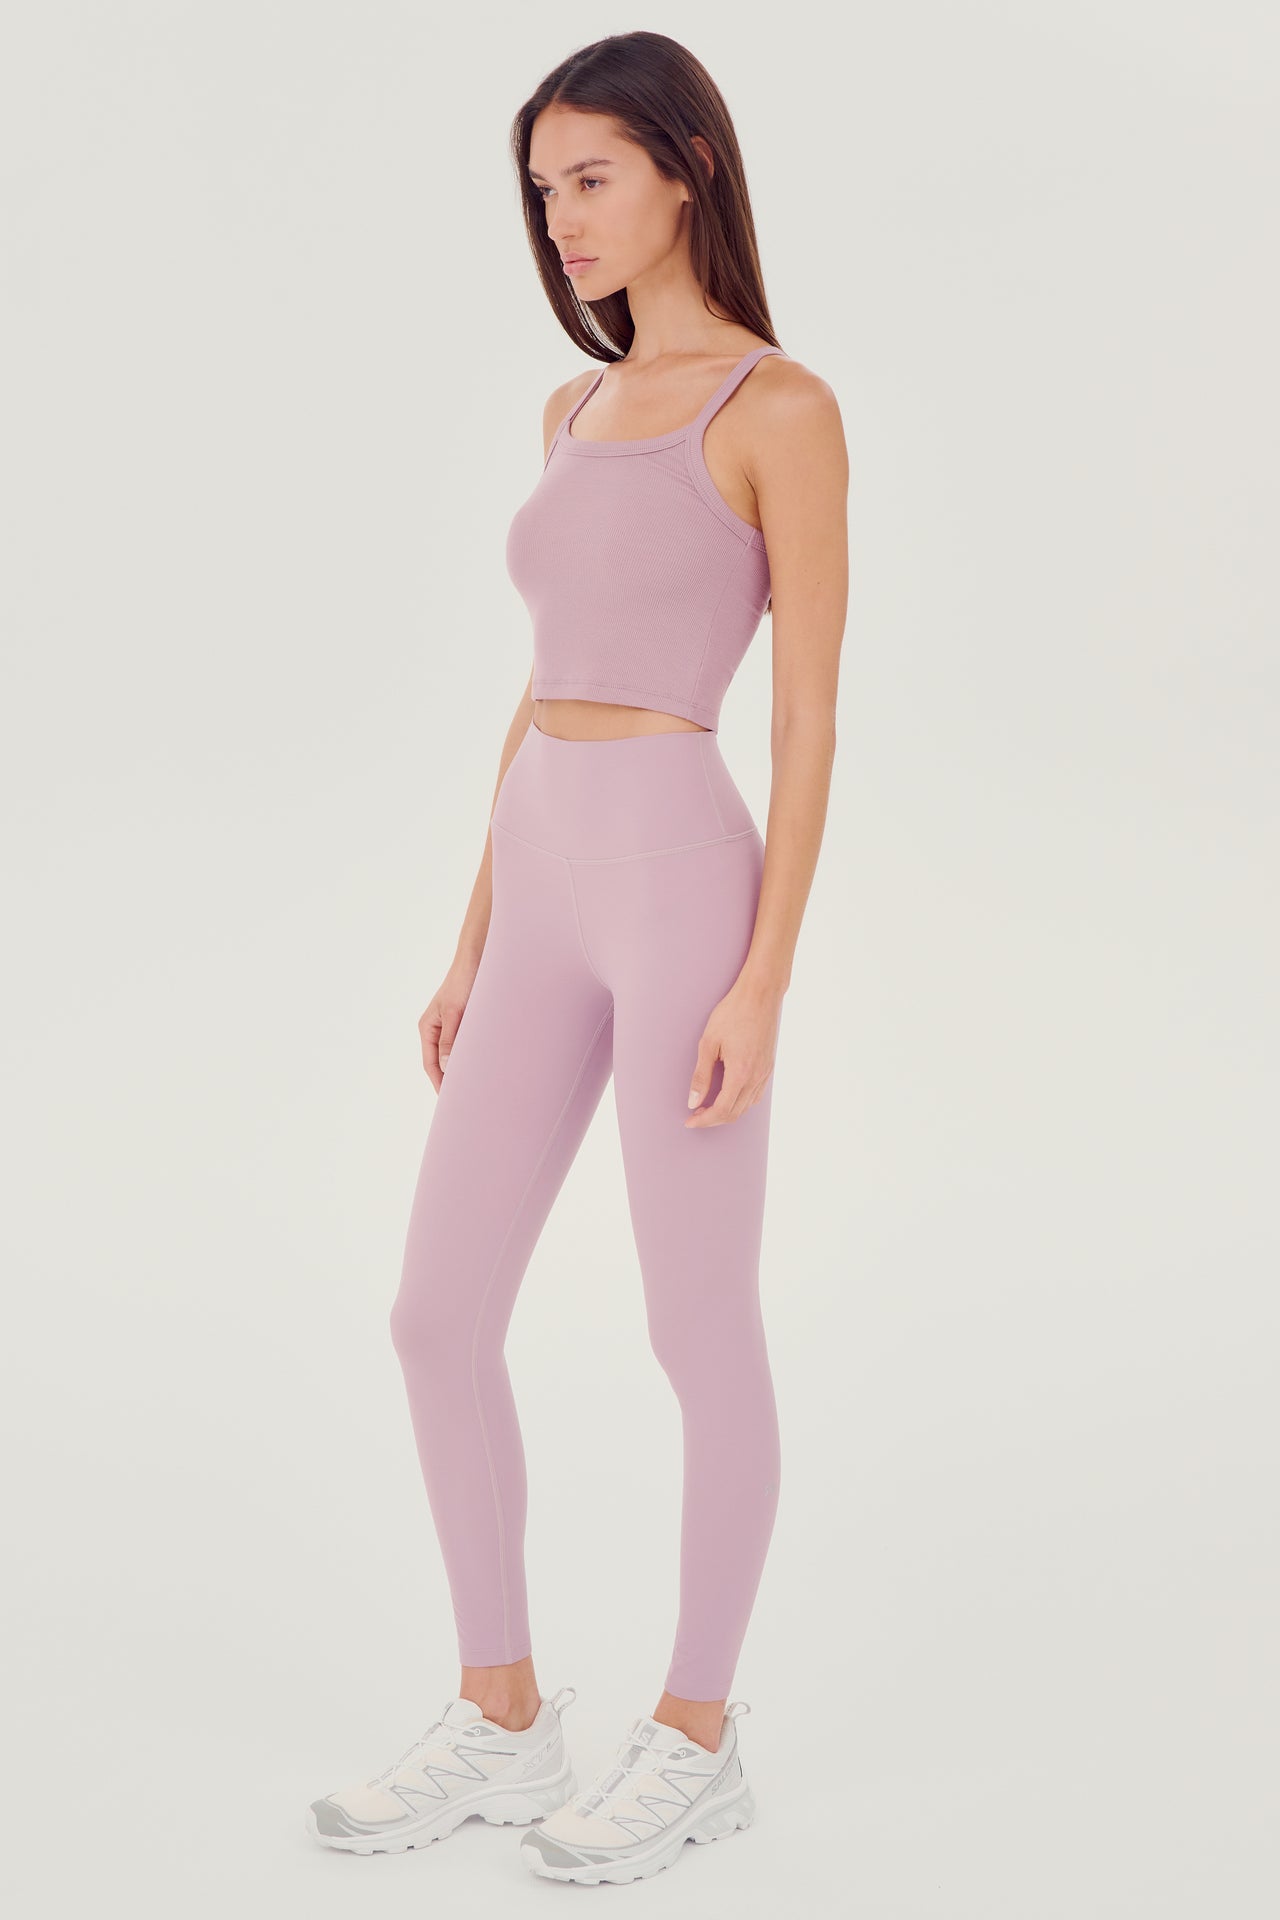 Full front side view of woman with straight dark hair wearing light pink high waist legging and light pink bra tank paired with white shoes